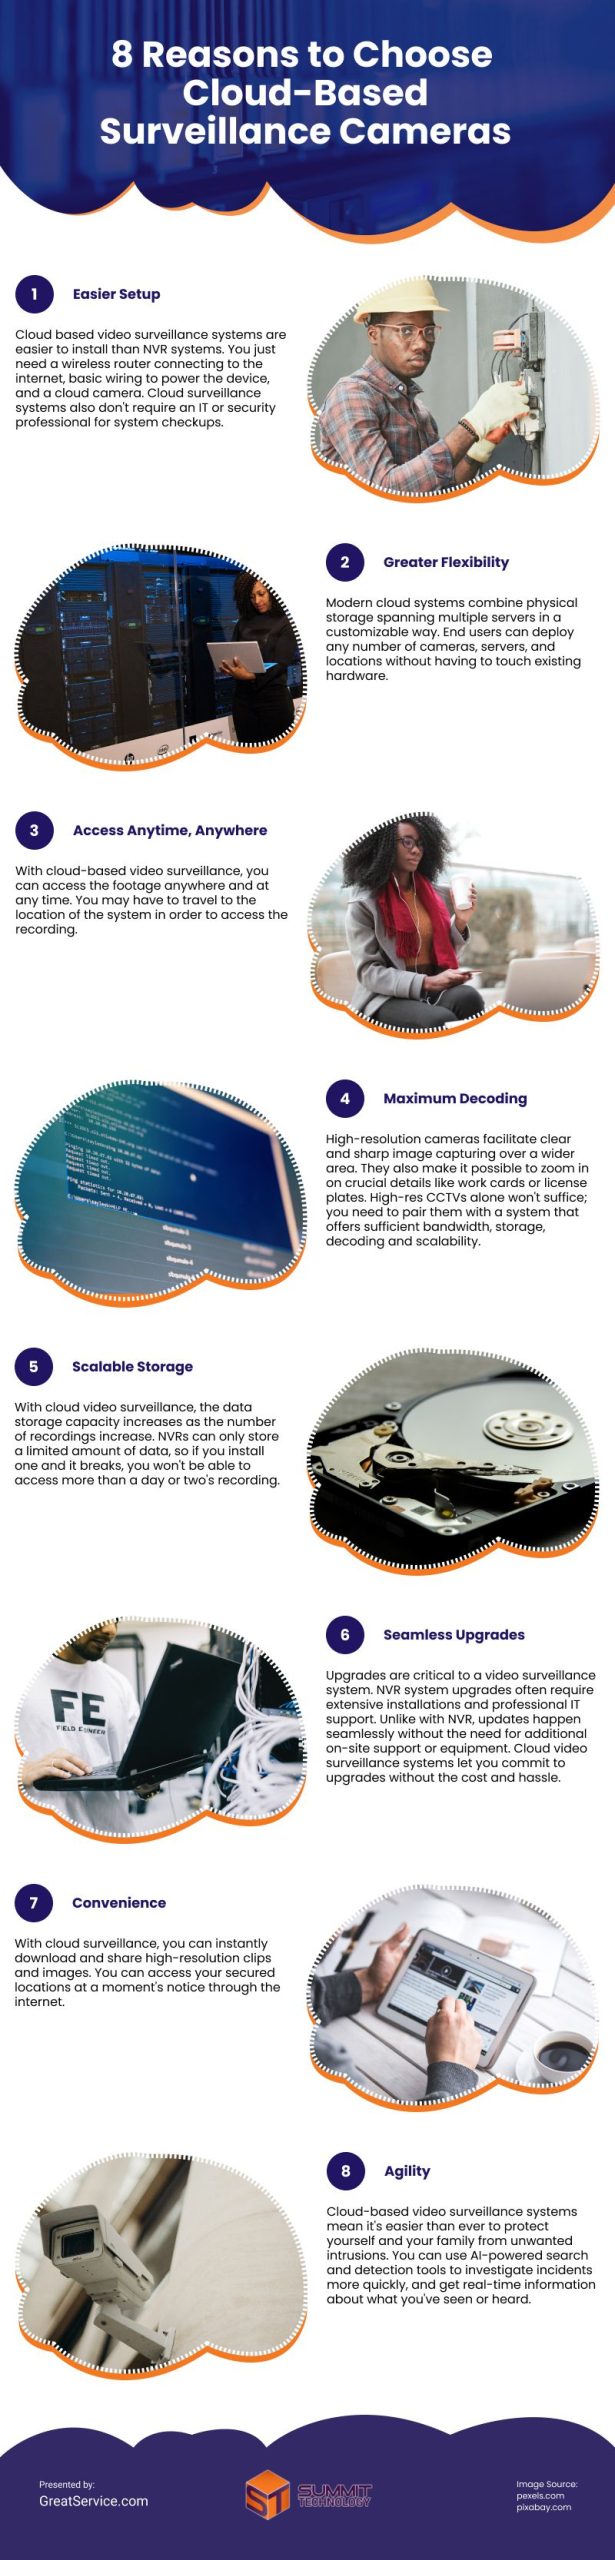 8 Reasons to Choose Cloud-Based Surveillance Cameras Infographic